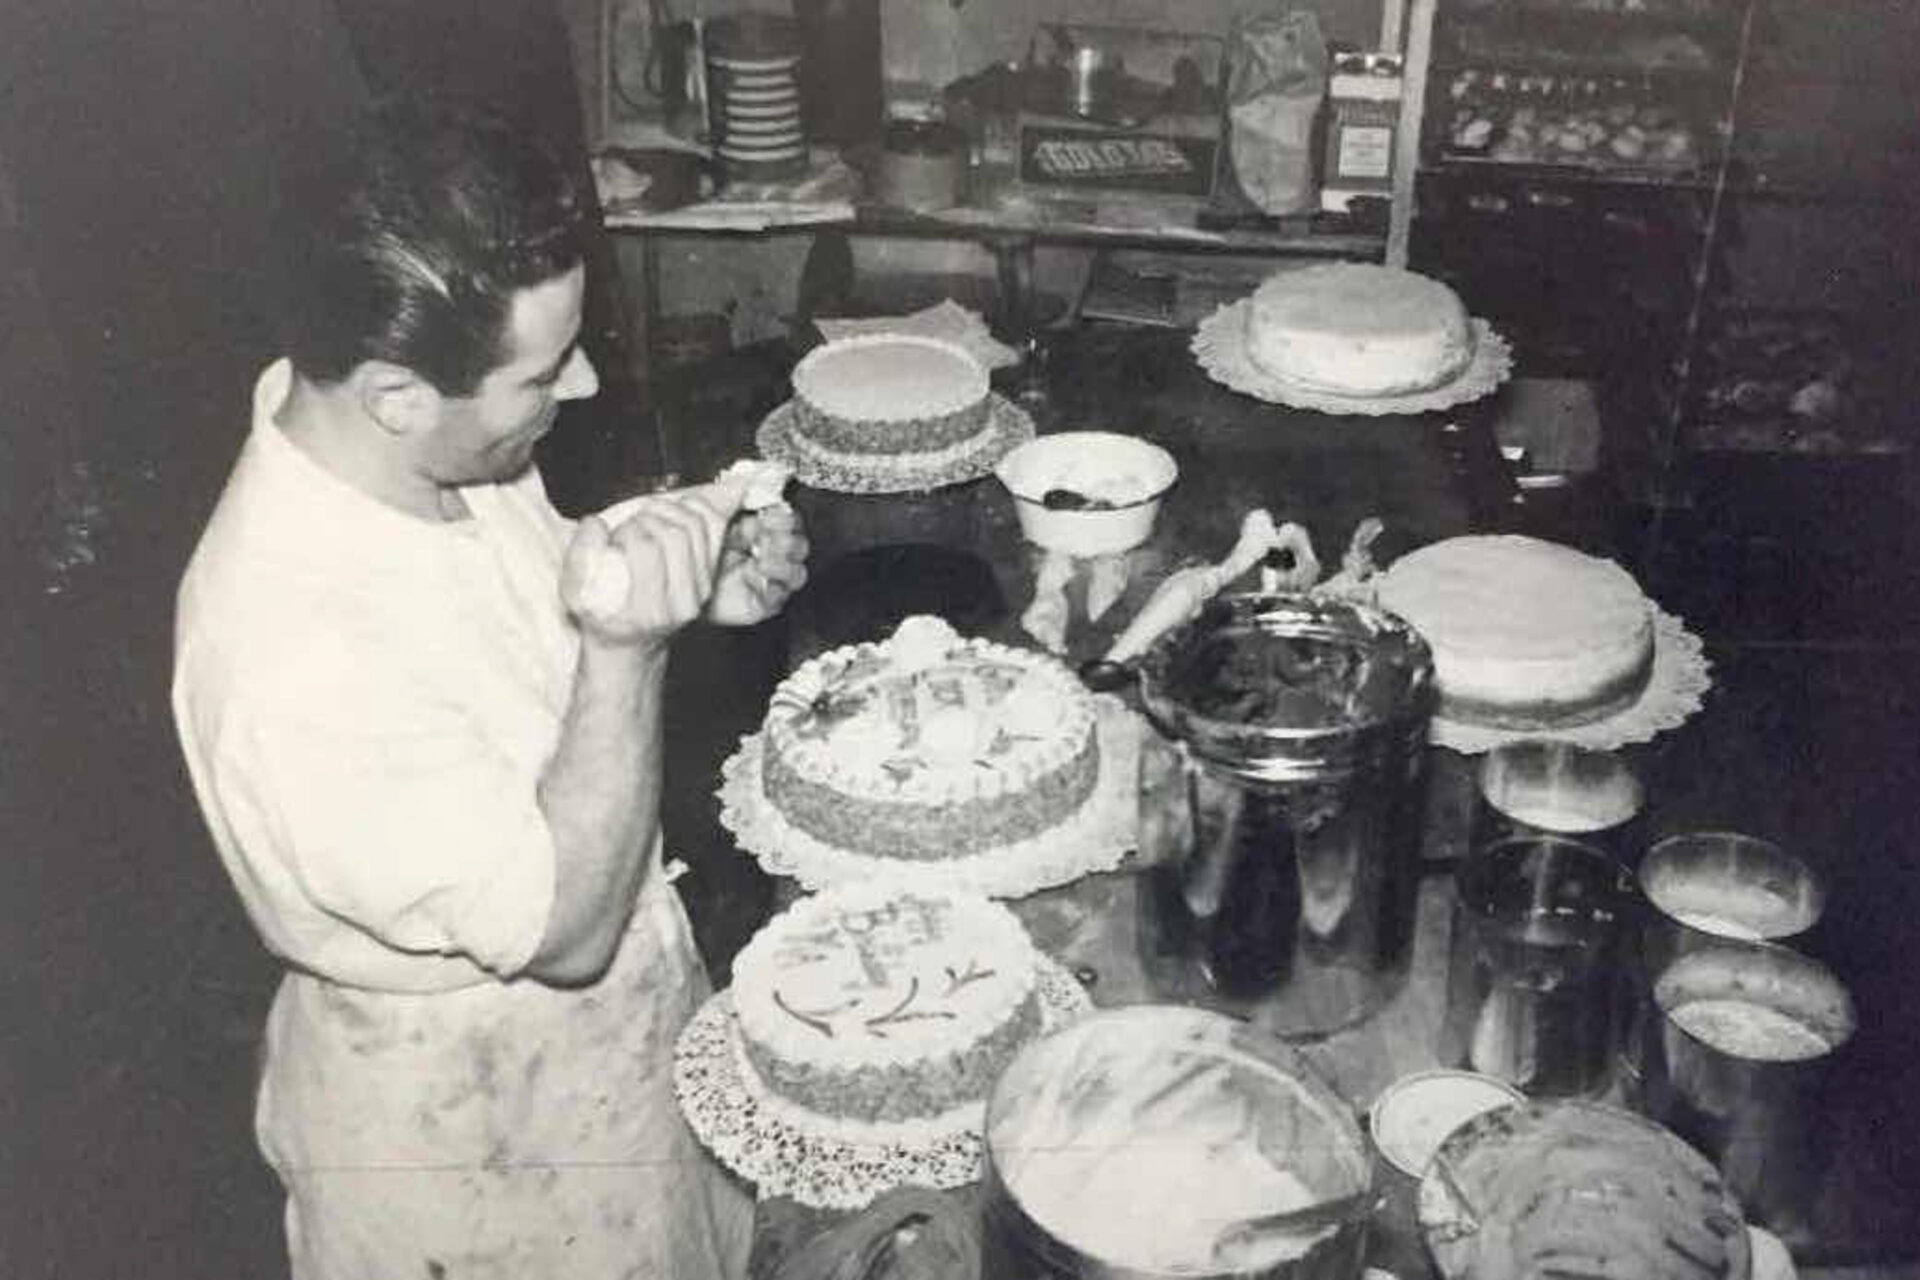 a black and white photo of a man in a white apron piping icing onto cakes